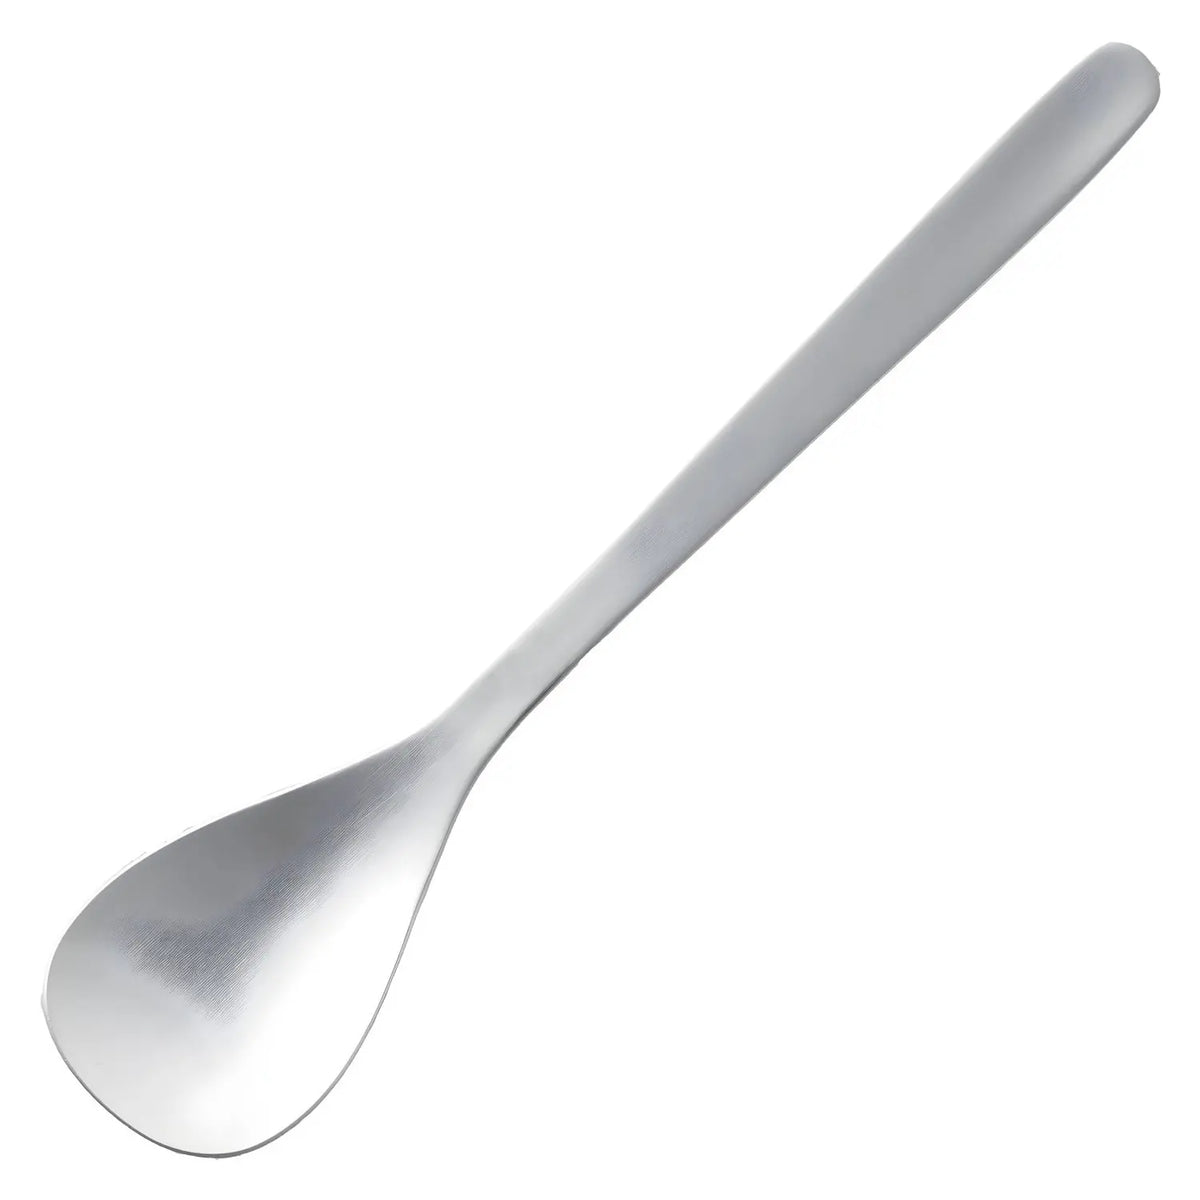 4 White Mixing Spoons. Plastic Cooking Spoons Baking Brewing Spoon Grill.  Mixing Spoon Dishwasher Safe.White Plastic Stirring Spoon.